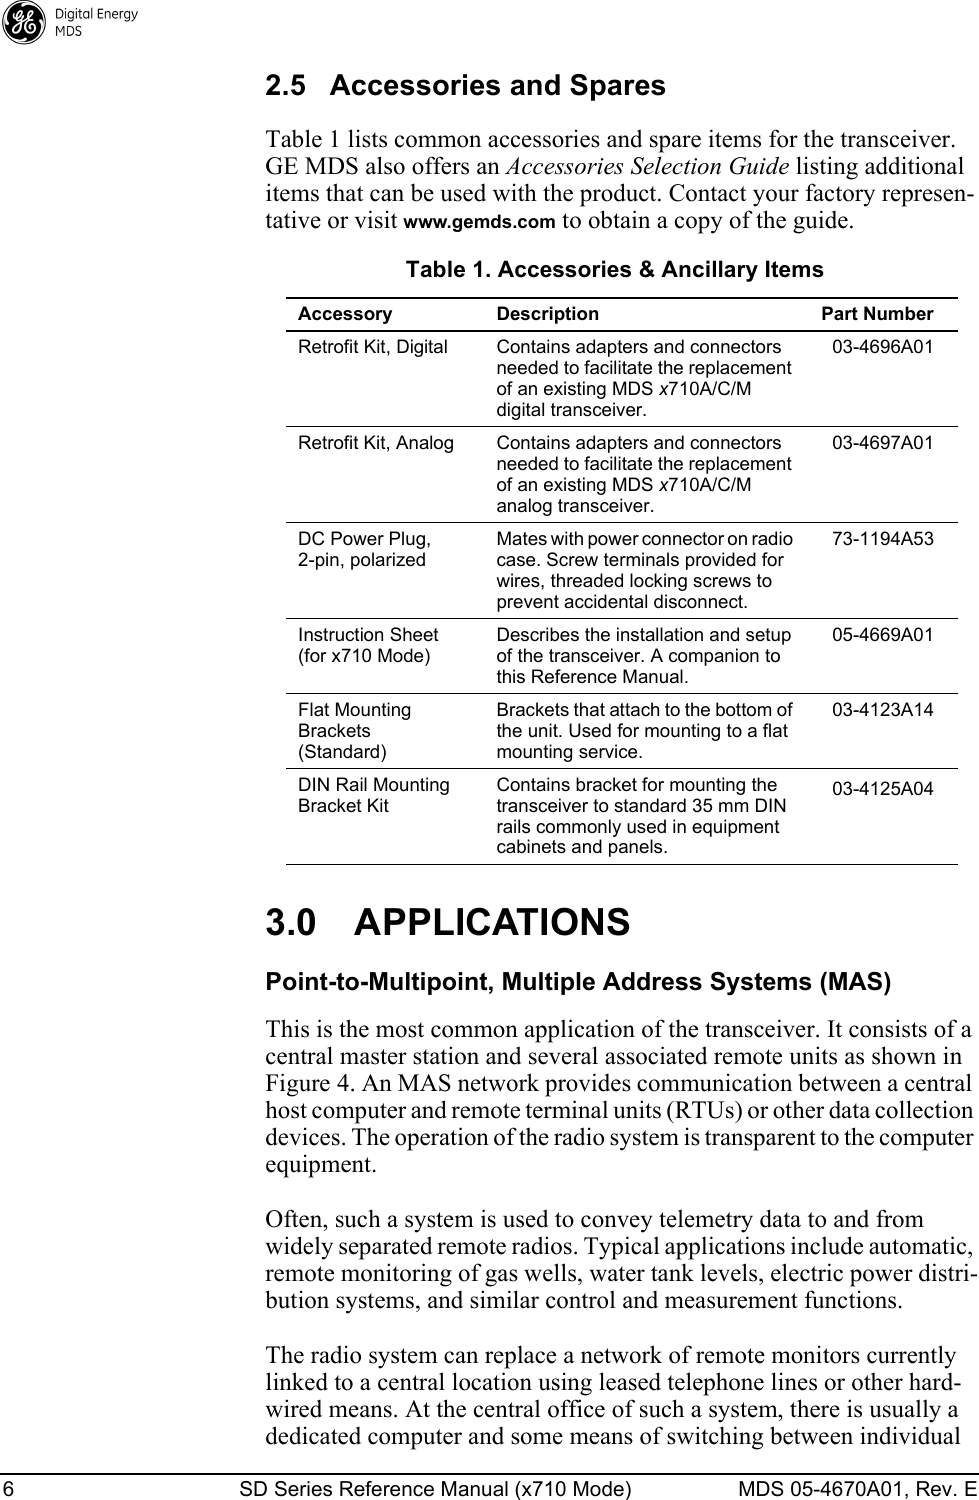 6 SD Series Reference Manual (x710 Mode) MDS 05-4670A01, Rev. E 2.5 Accessories and SparesTable 1 lists common accessories and spare items for the transceiver. GE MDS also offers an Accessories Selection Guide listing additional items that can be used with the product. Contact your factory represen-tative or visit www.gemds.com to obtain a copy of the guide.3.0 APPLICATIONSPoint-to-Multipoint, Multiple Address Systems (MAS)This is the most common application of the transceiver. It consists of a central master station and several associated remote units as shown in Figure 4. An MAS network provides communication between a central host computer and remote terminal units (RTUs) or other data collection devices. The operation of the radio system is transparent to the computer equipment.Often, such a system is used to convey telemetry data to and from widely separated remote radios. Typical applications include automatic, remote monitoring of gas wells, water tank levels, electric power distri-bution systems, and similar control and measurement functions.The radio system can replace a network of remote monitors currently linked to a central location using leased telephone lines or other hard-wired means. At the central office of such a system, there is usually a dedicated computer and some means of switching between individual Table 1. Accessories &amp; Ancillary ItemsAccessory Description Part NumberRetrofit Kit, Digital Contains adapters and connectors needed to facilitate the replacement of an existing MDS x710A/C/M digital transceiver.03-4696A01Retrofit Kit, Analog Contains adapters and connectors needed to facilitate the replacement of an existing MDS x710A/C/M analog transceiver.03-4697A01DC Power Plug, 2-pin, polarizedMates with power connector on radio case. Screw terminals provided for wires, threaded locking screws to prevent accidental disconnect.73-1194A53Instruction Sheet(for x710 Mode)Describes the installation and setup of the transceiver. A companion to this Reference Manual.05-4669A01Flat Mounting Brackets(Standard)Brackets that attach to the bottom of the unit. Used for mounting to a flat mounting service.03-4123A14DIN Rail Mounting Bracket KitContains bracket for mounting the transceiver to standard 35 mm DIN rails commonly used in equipment cabinets and panels.03-4125A04